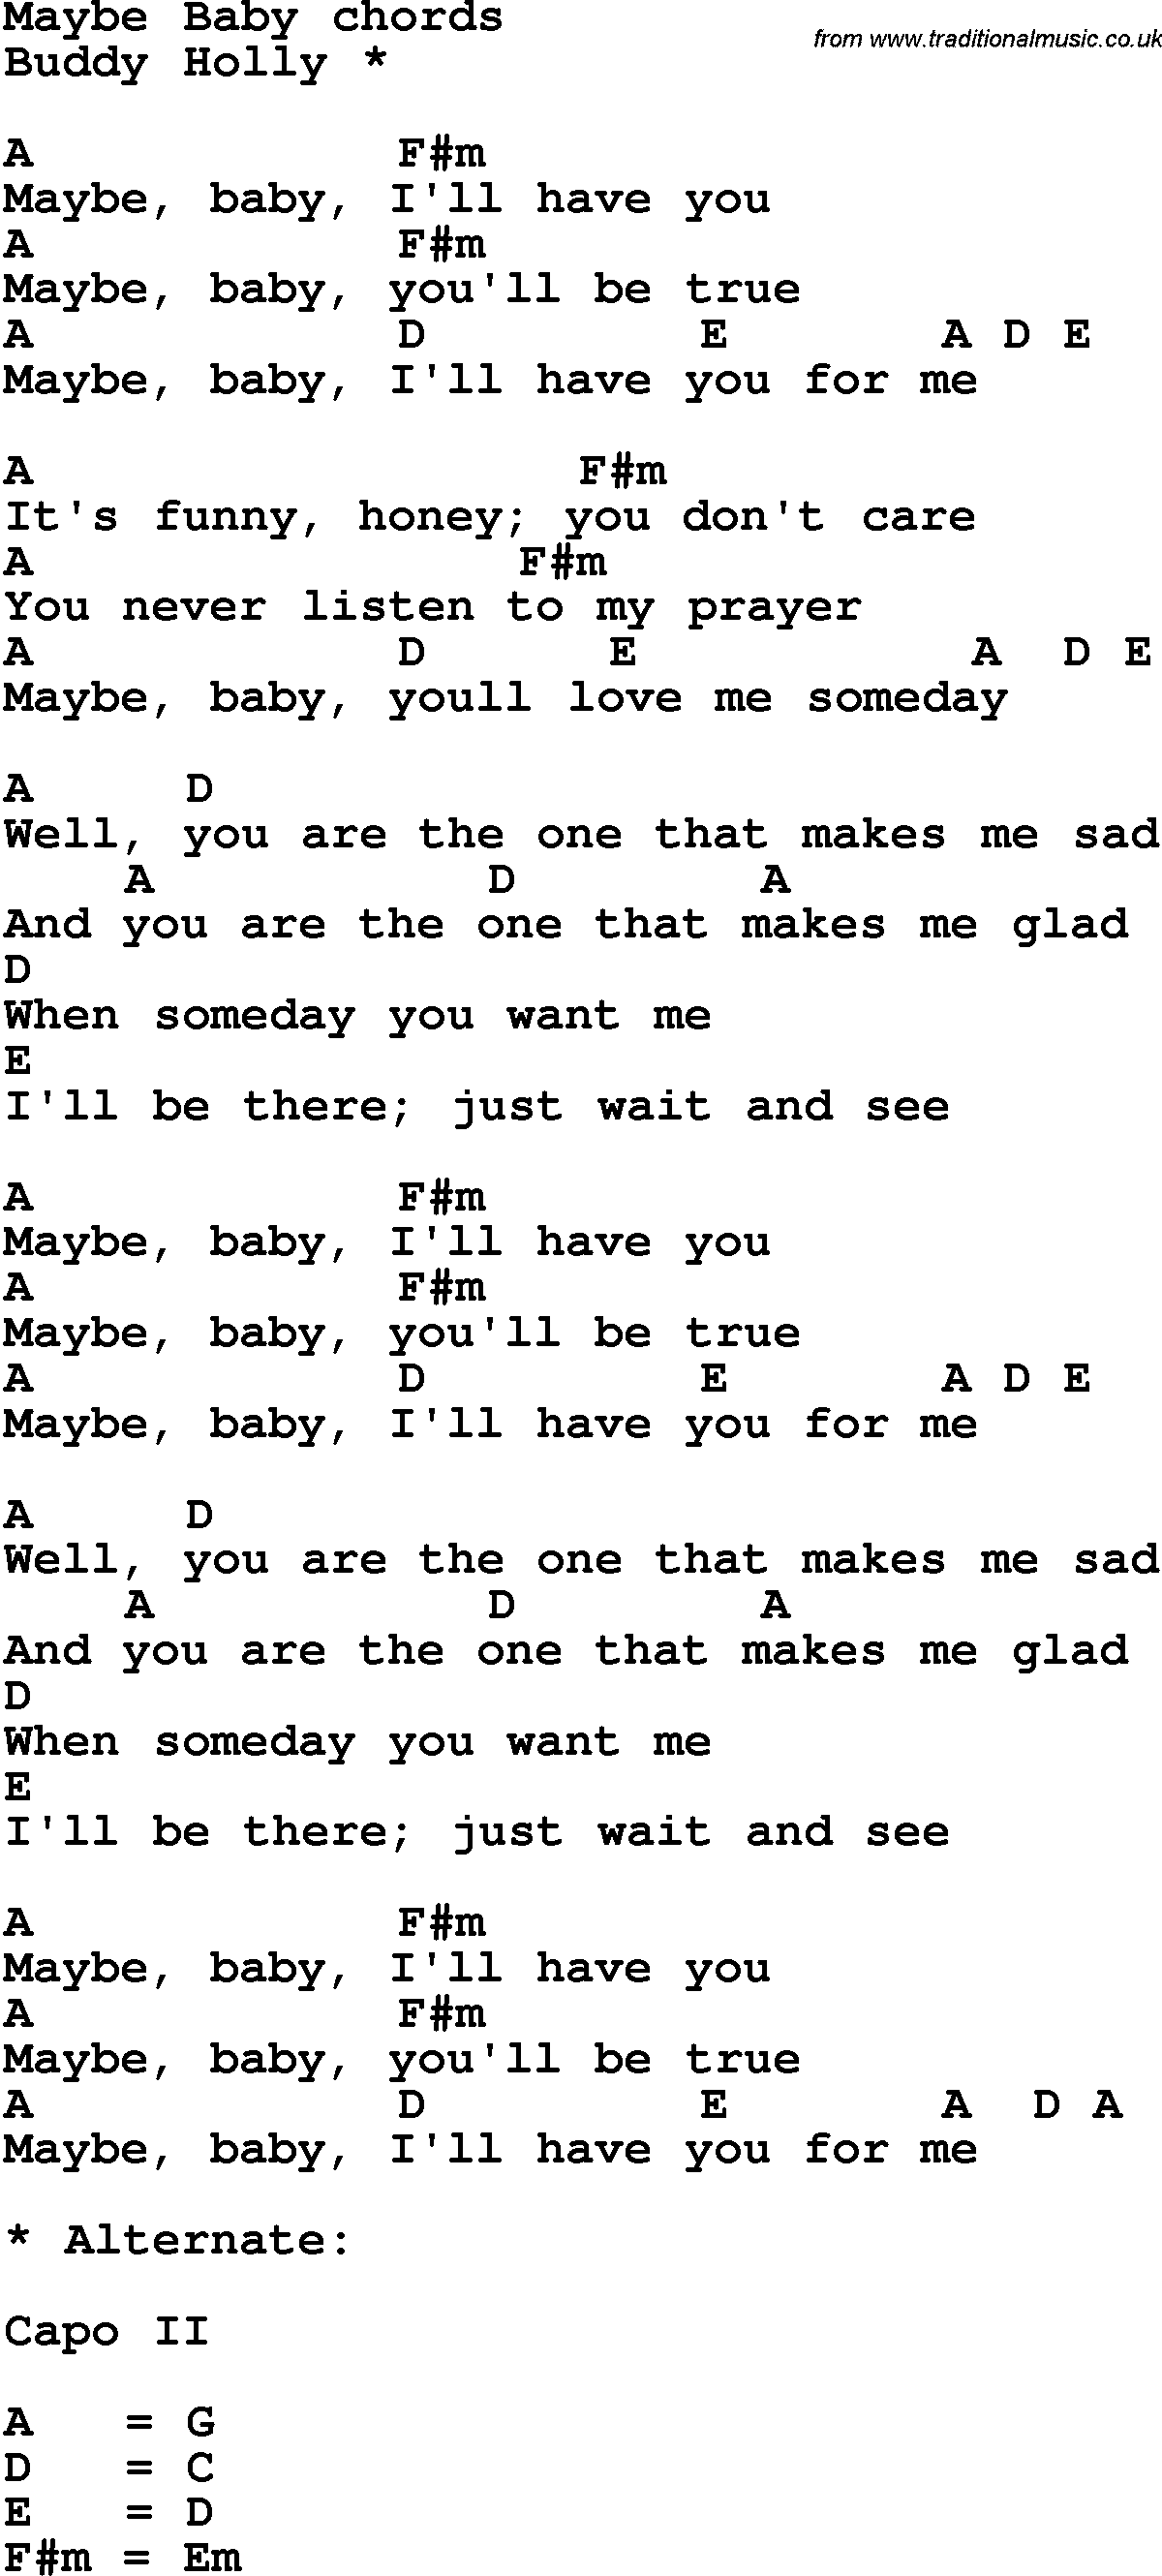 Song Lyrics with guitar chords for Maybe Baby